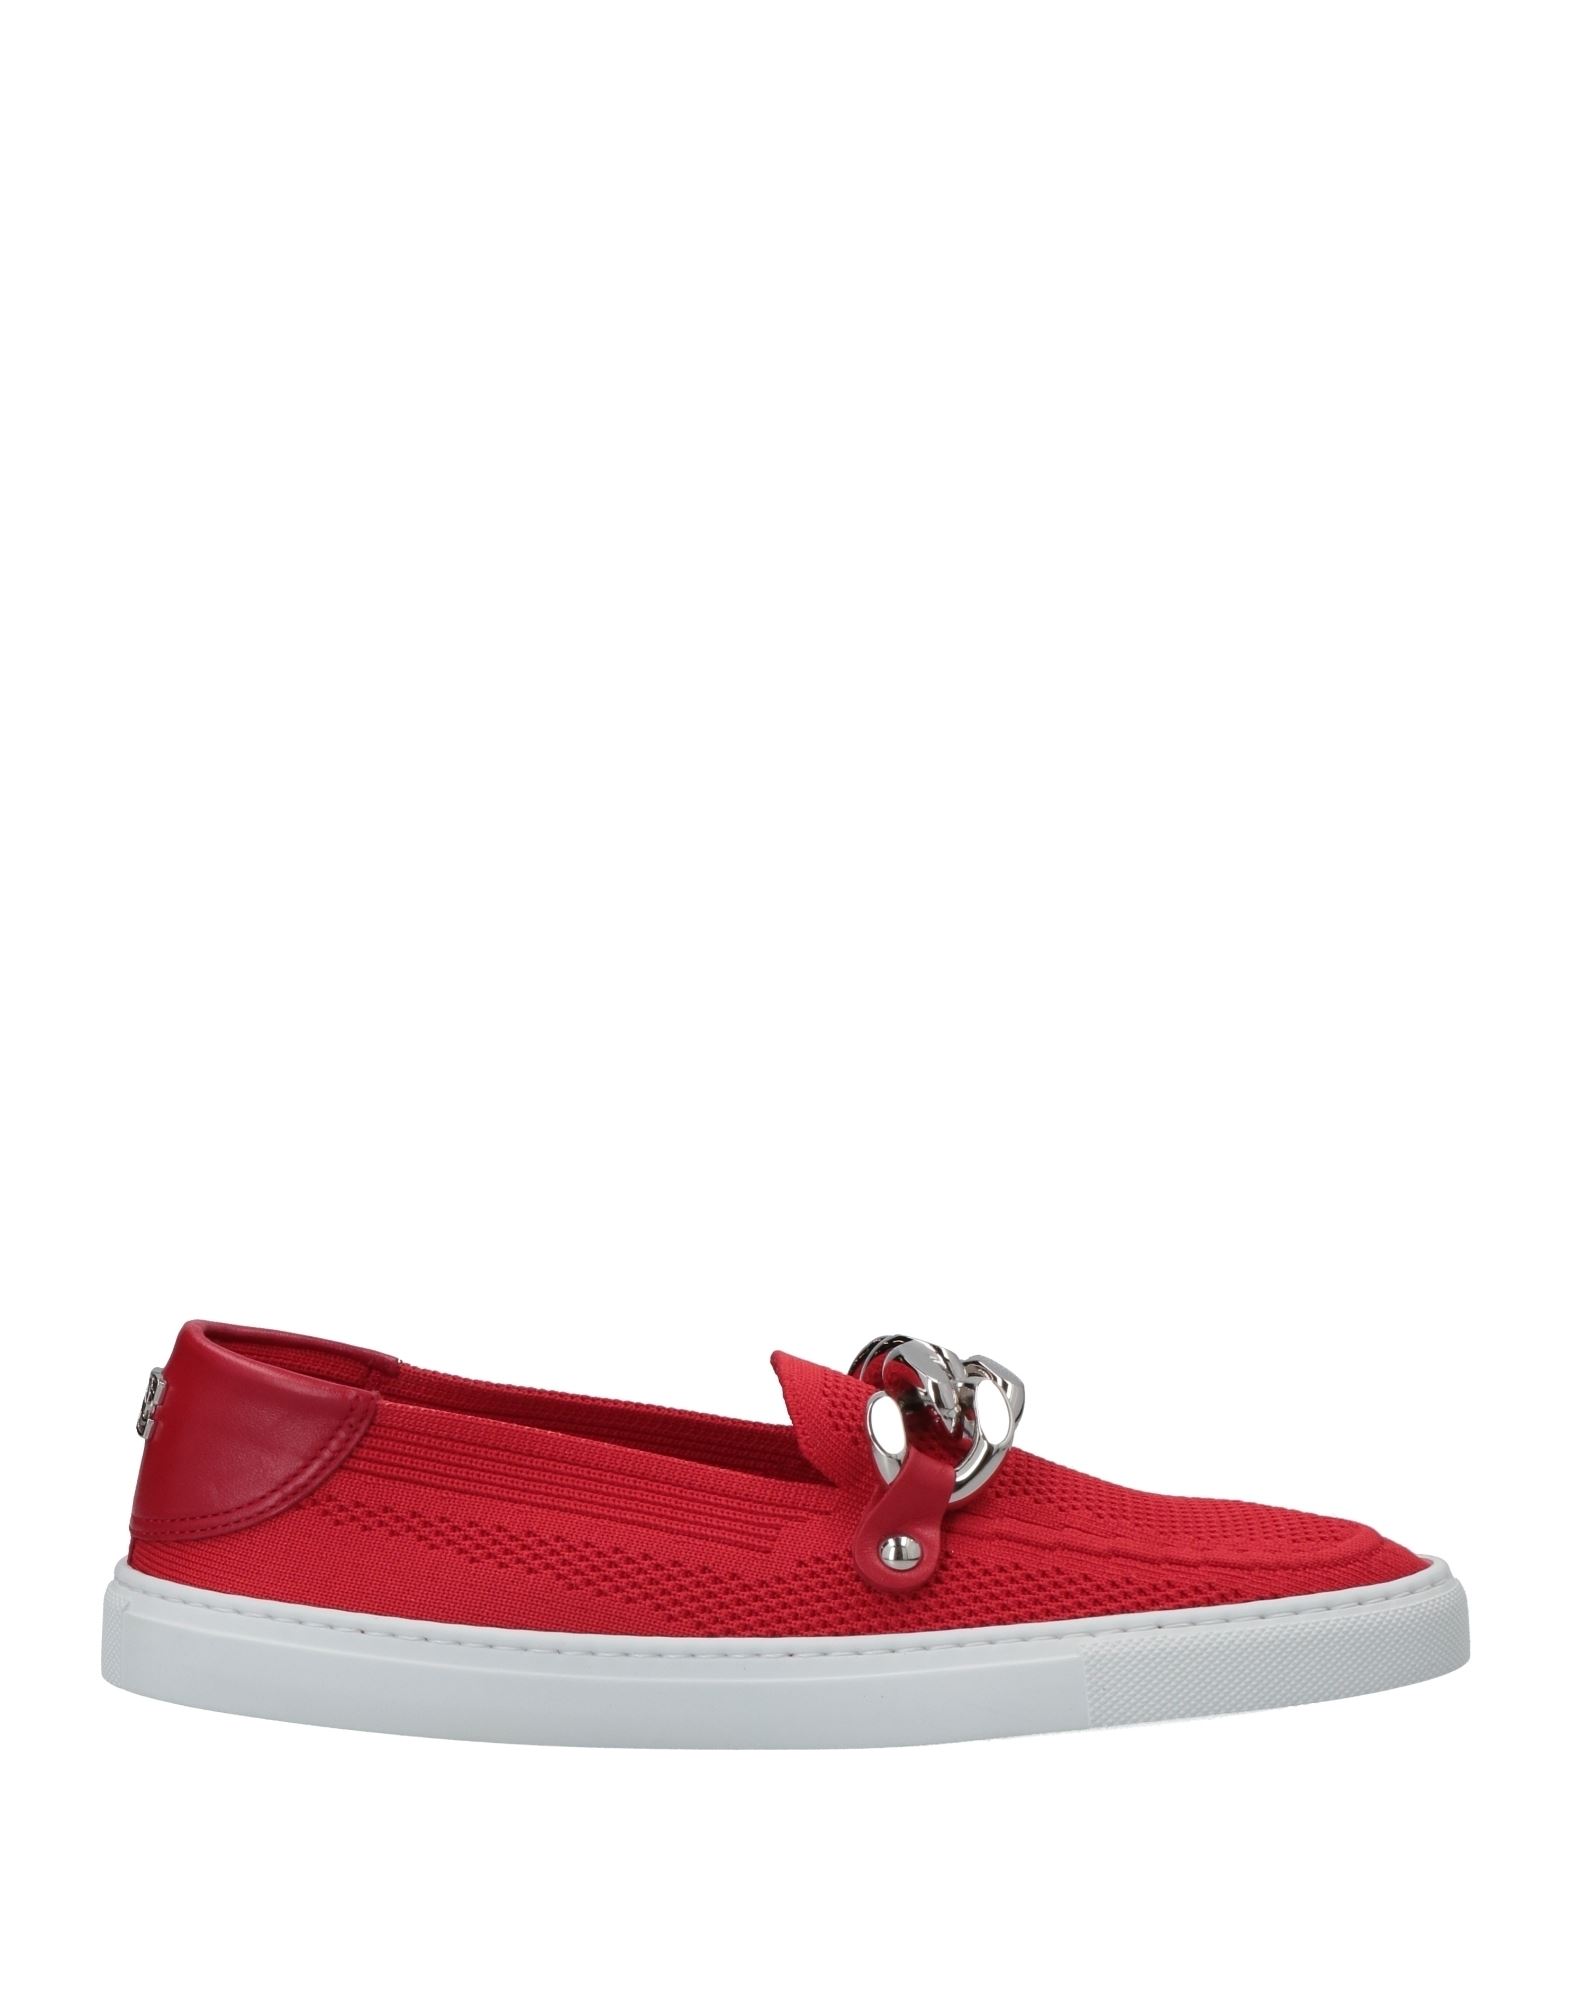 Casadei Loafers In Red